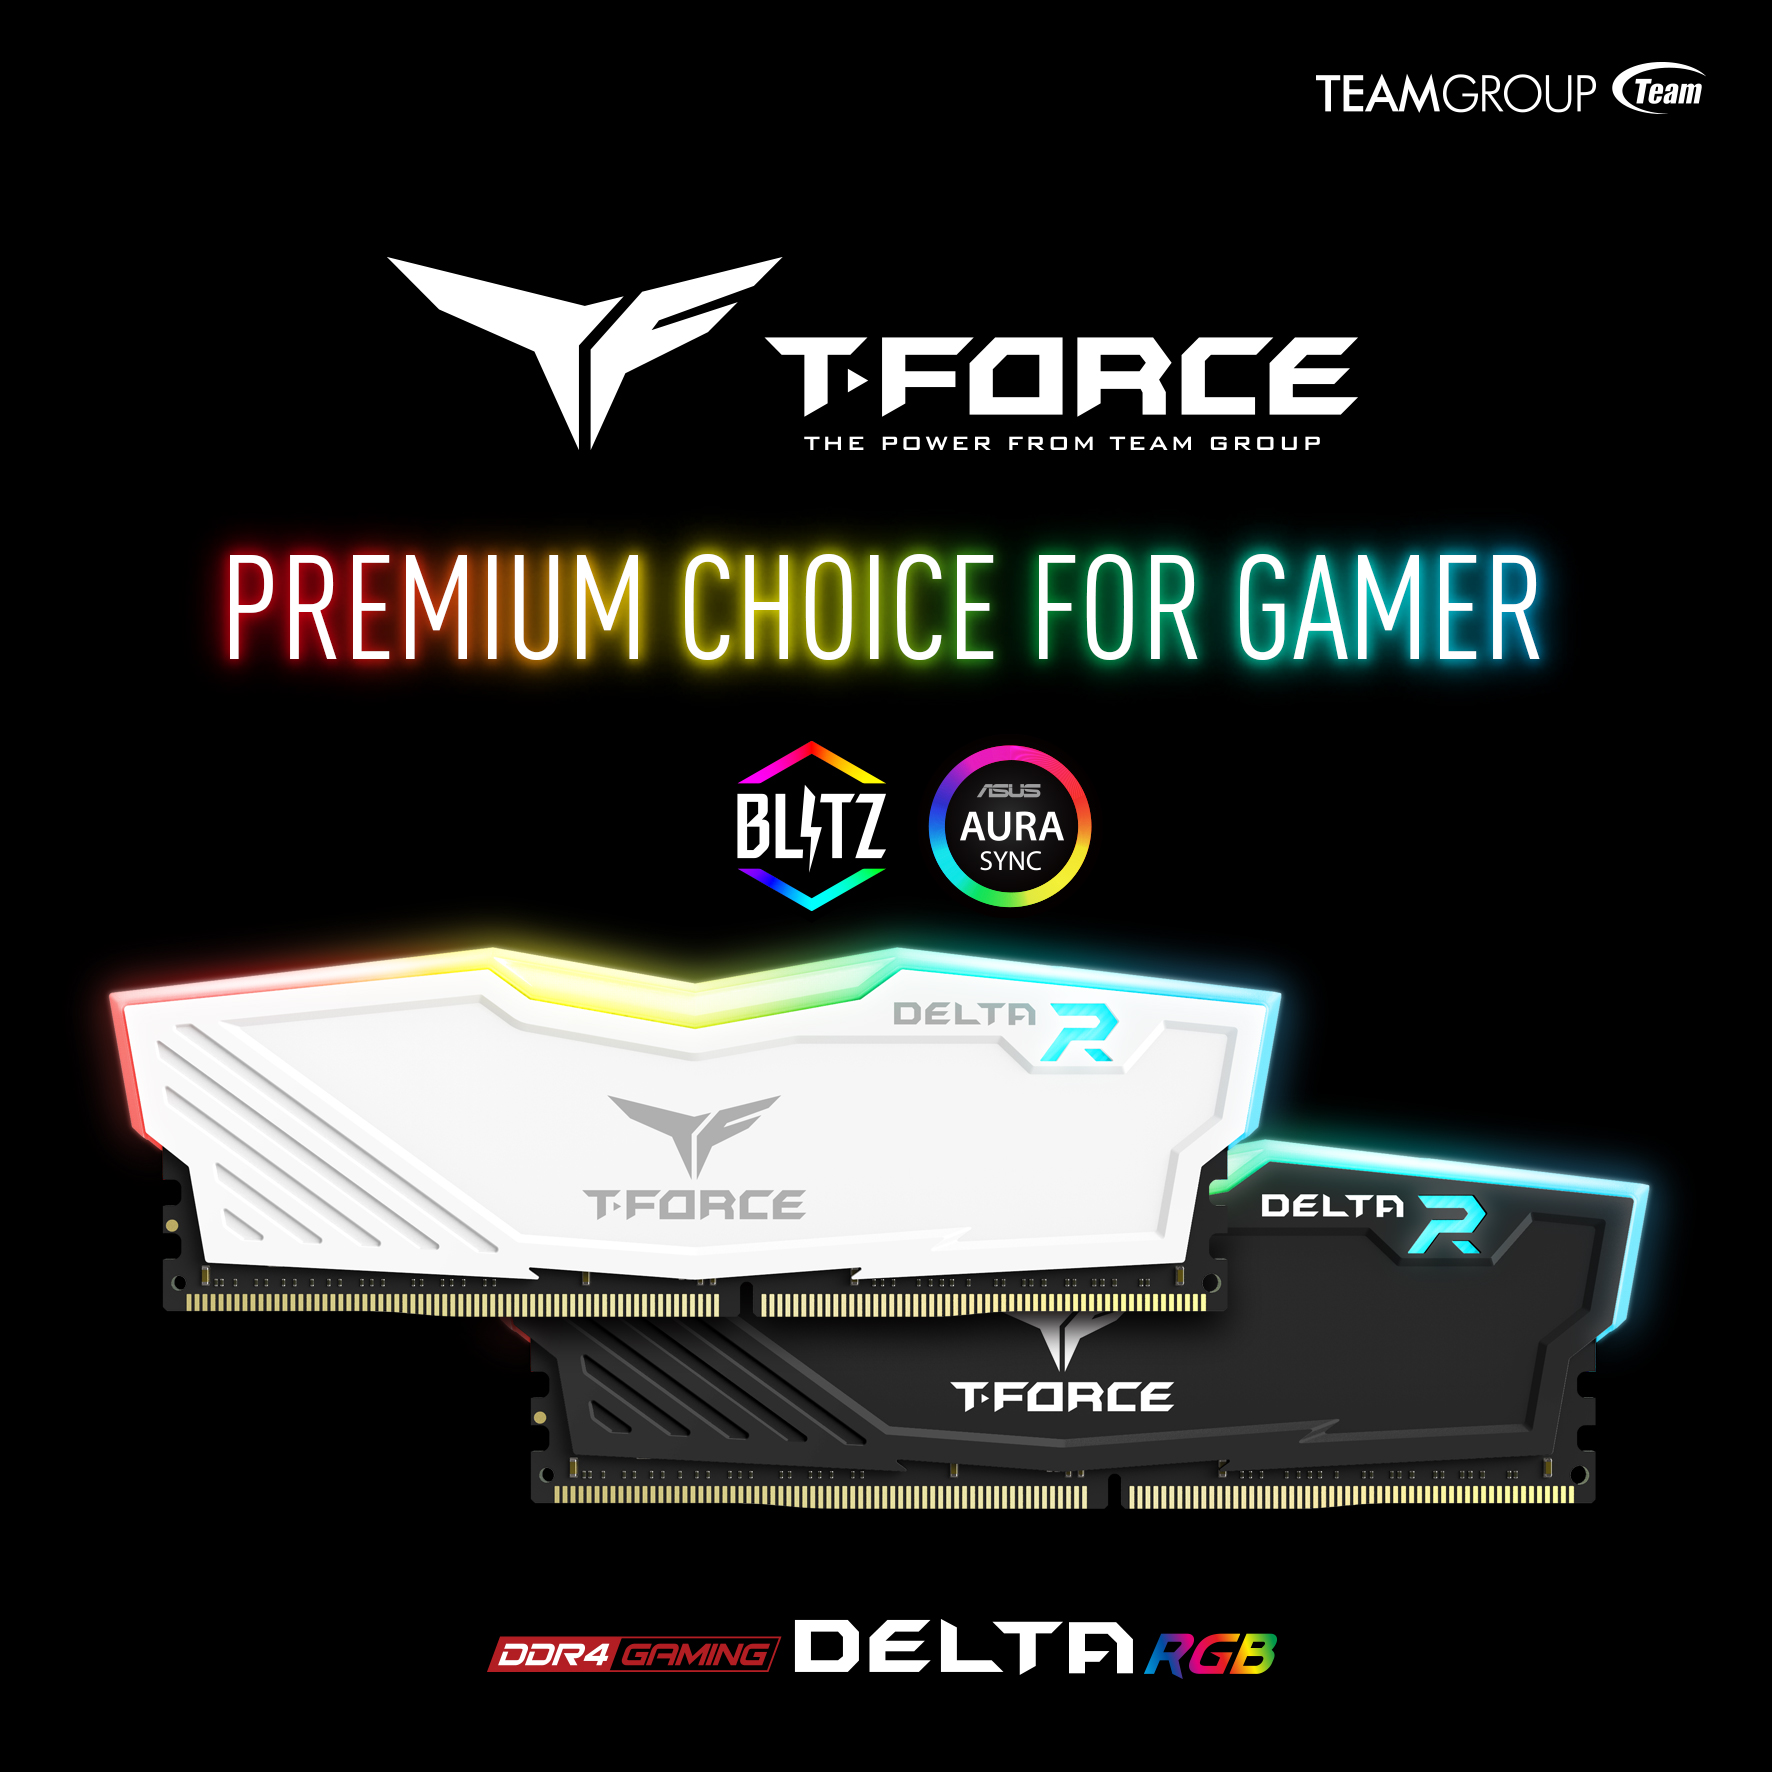 DELTA RGB DDR4 Memory Moudle / Team Group Inc.